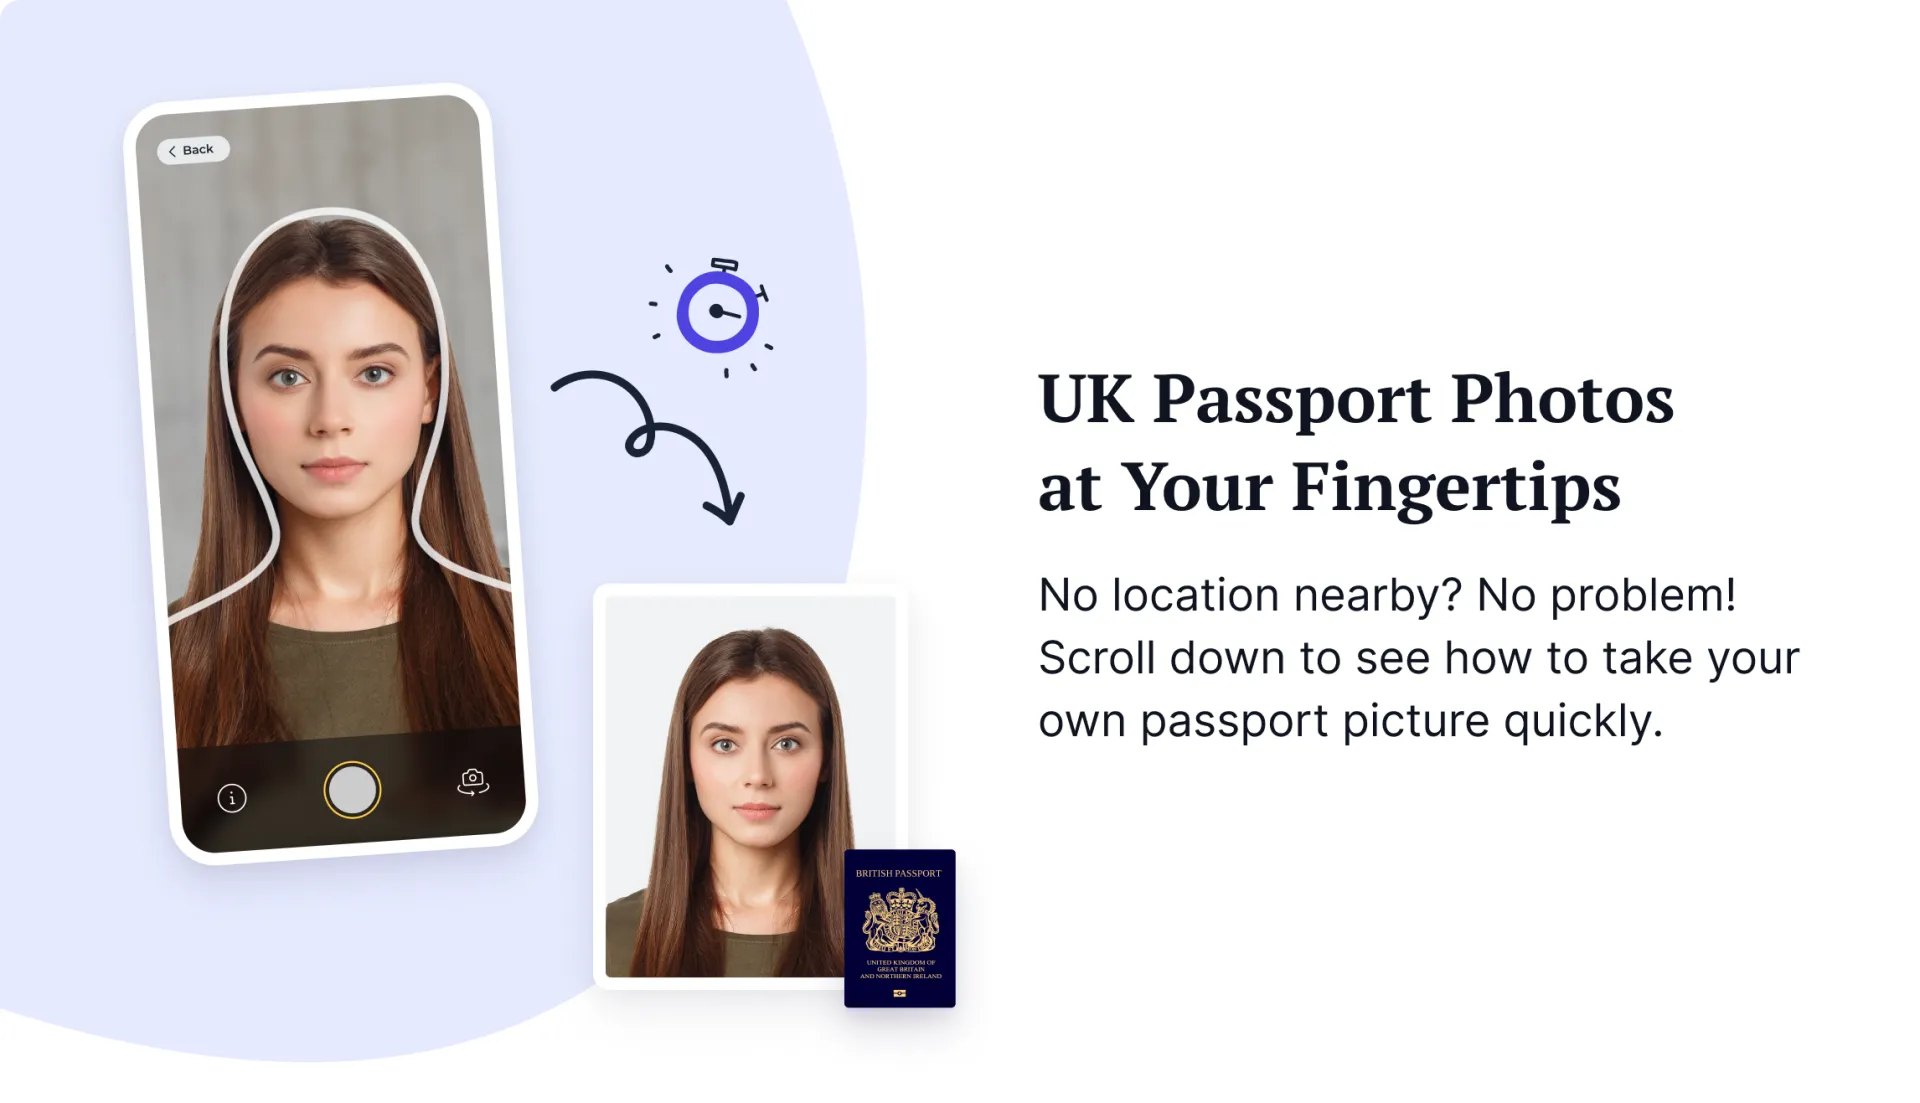  A graphic showing a UK passport photo created on a mobile phone.